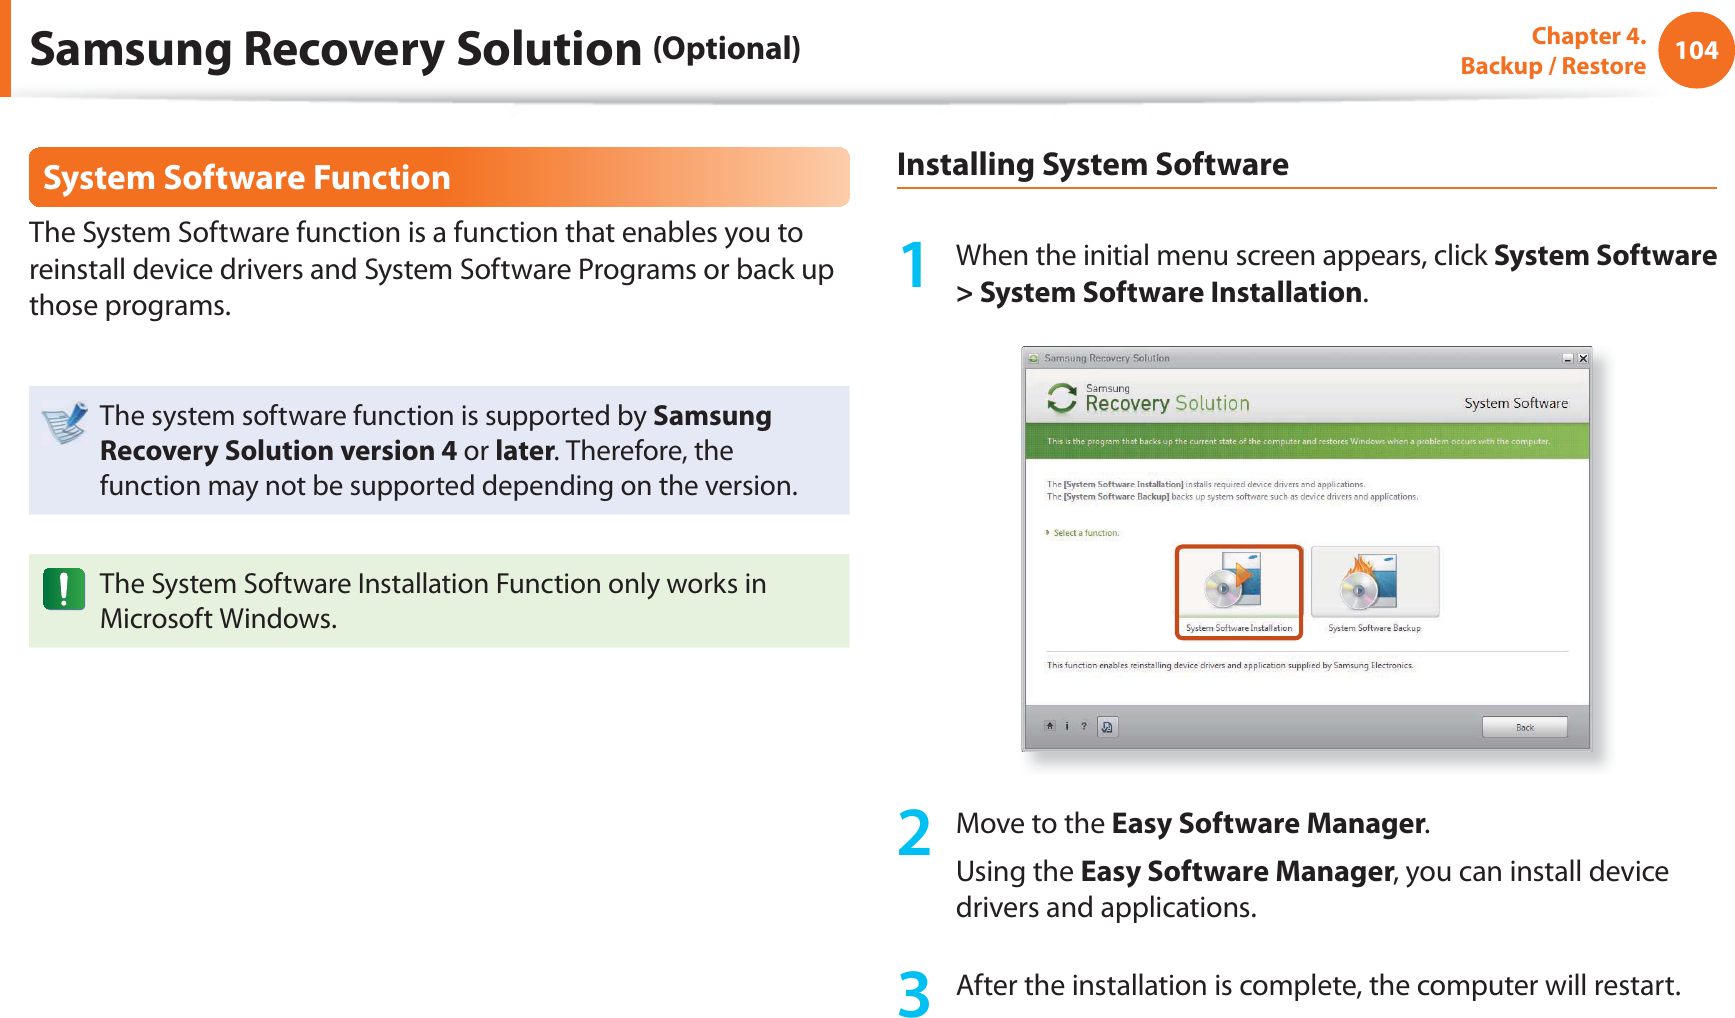 104Chapter 4.  Backup / RestoreSystem Software FunctionThe System Software function is a function that enables you to reinstall device drivers and System Software Programs or back up those programs. The system software function is supported by Samsung Recovery Solution version 4 or later. Therefore, the function may not be supported depending on the version.The System Software Installation Function only works in Microsoft Windows.Installing System Software1  When the initial menu screen appears, click System Software &gt; System Software Installation.2  Move to the Easy Software Manager. Using the Easy Software Manager, you can install device drivers and applications.3  After the installation is complete, the computer will restart.Samsung Recovery Solution (Optional)